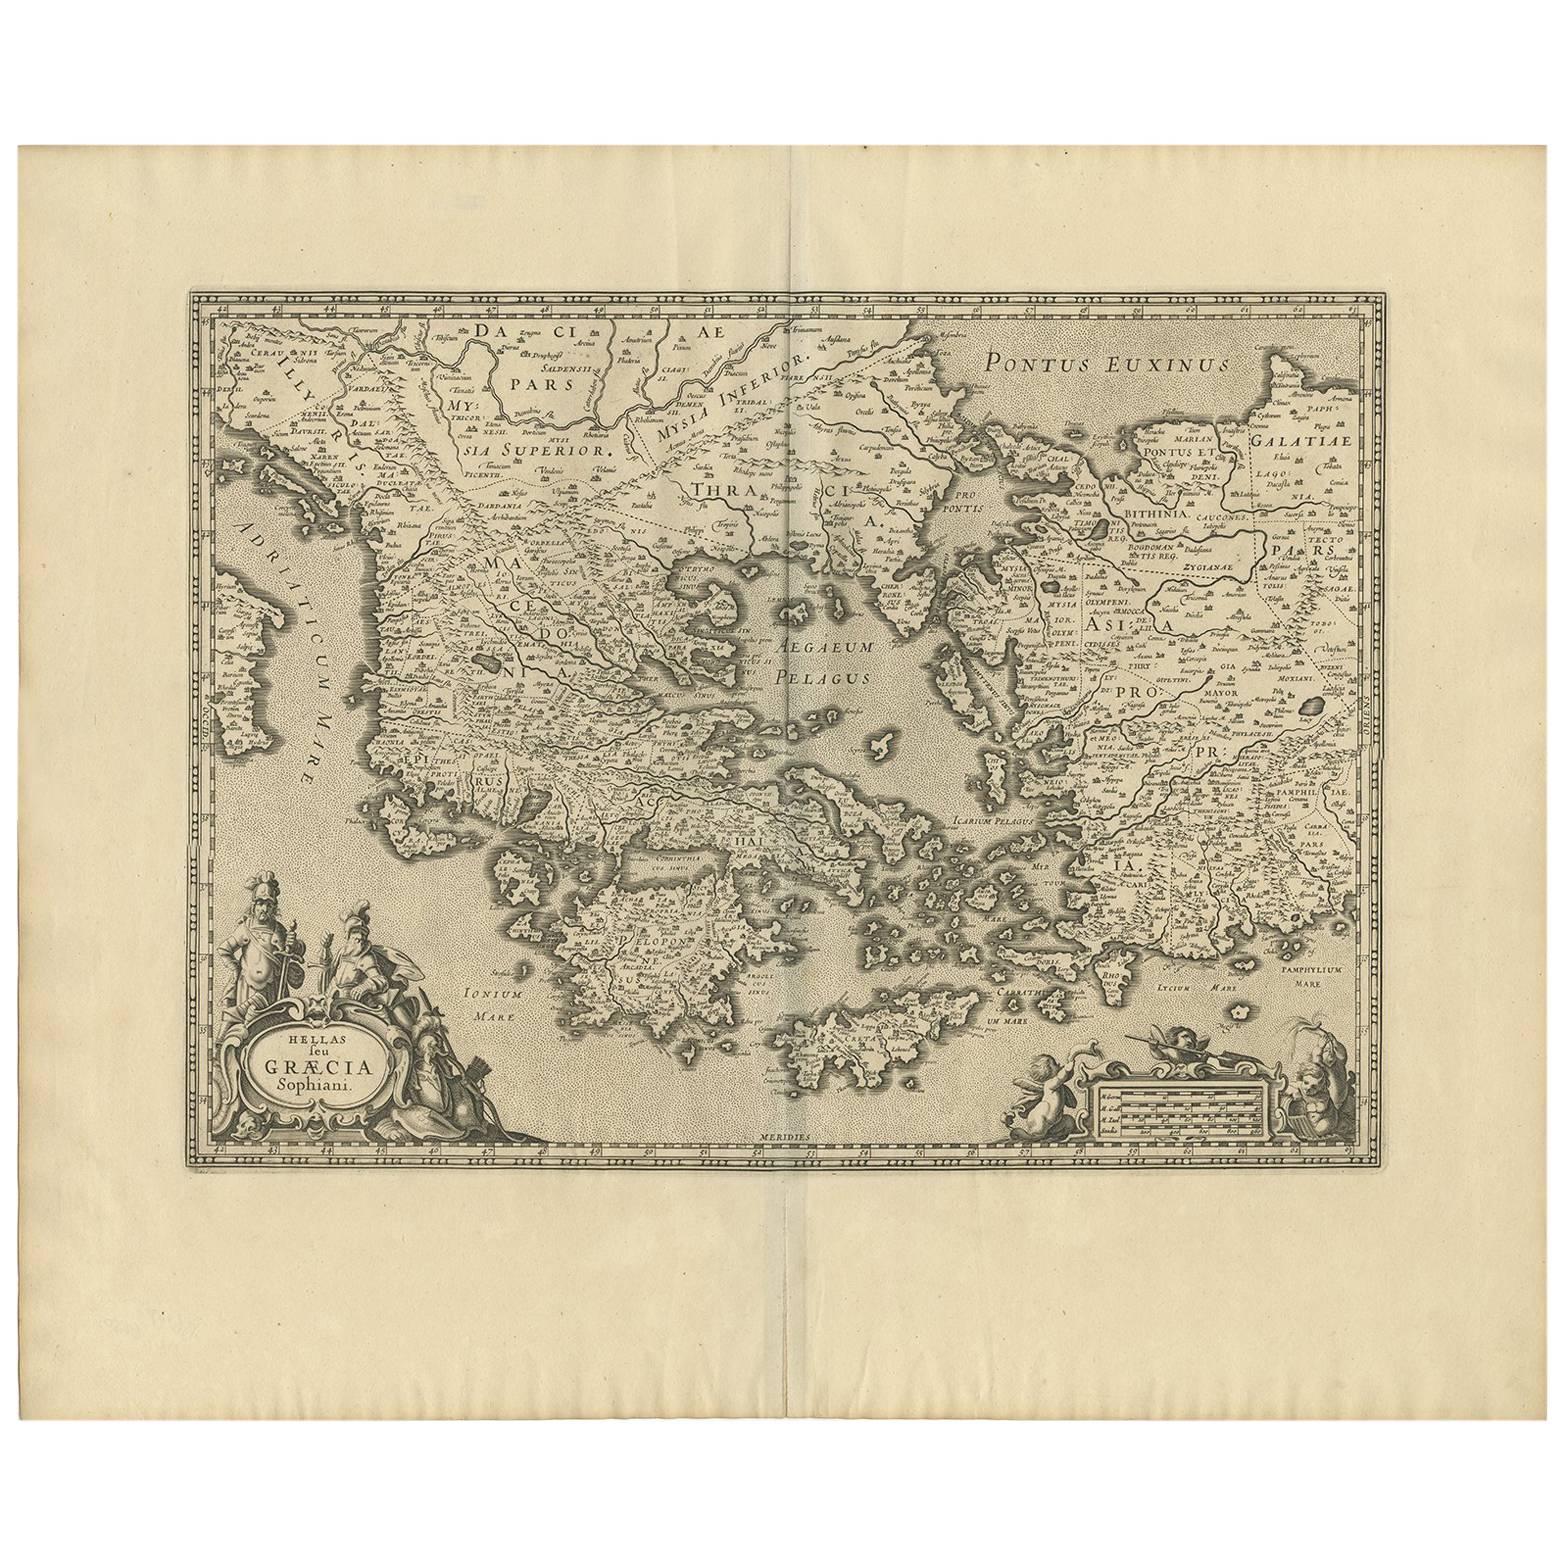 Antique Map of Greece by J. Jansson, circa 1653